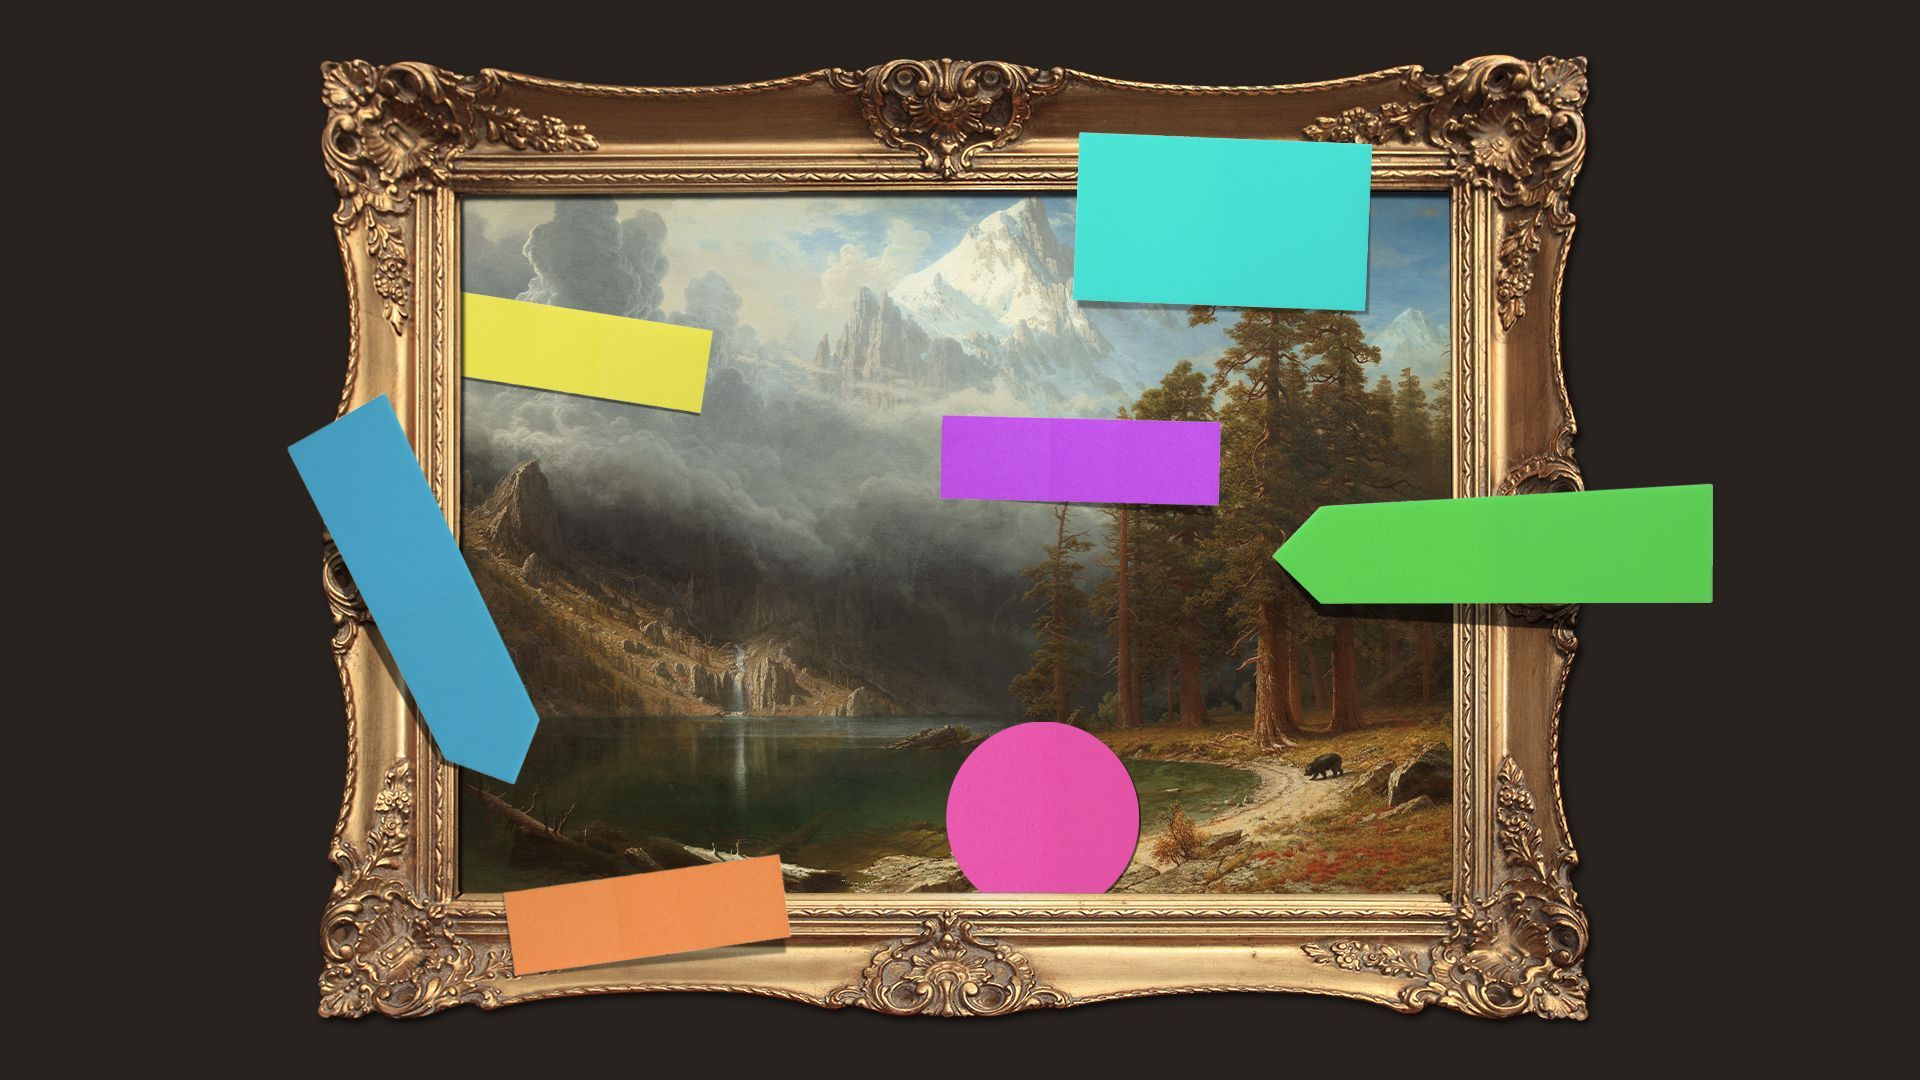 Illustration of a framed painting with sticky notes of different shapes and sizes all over it